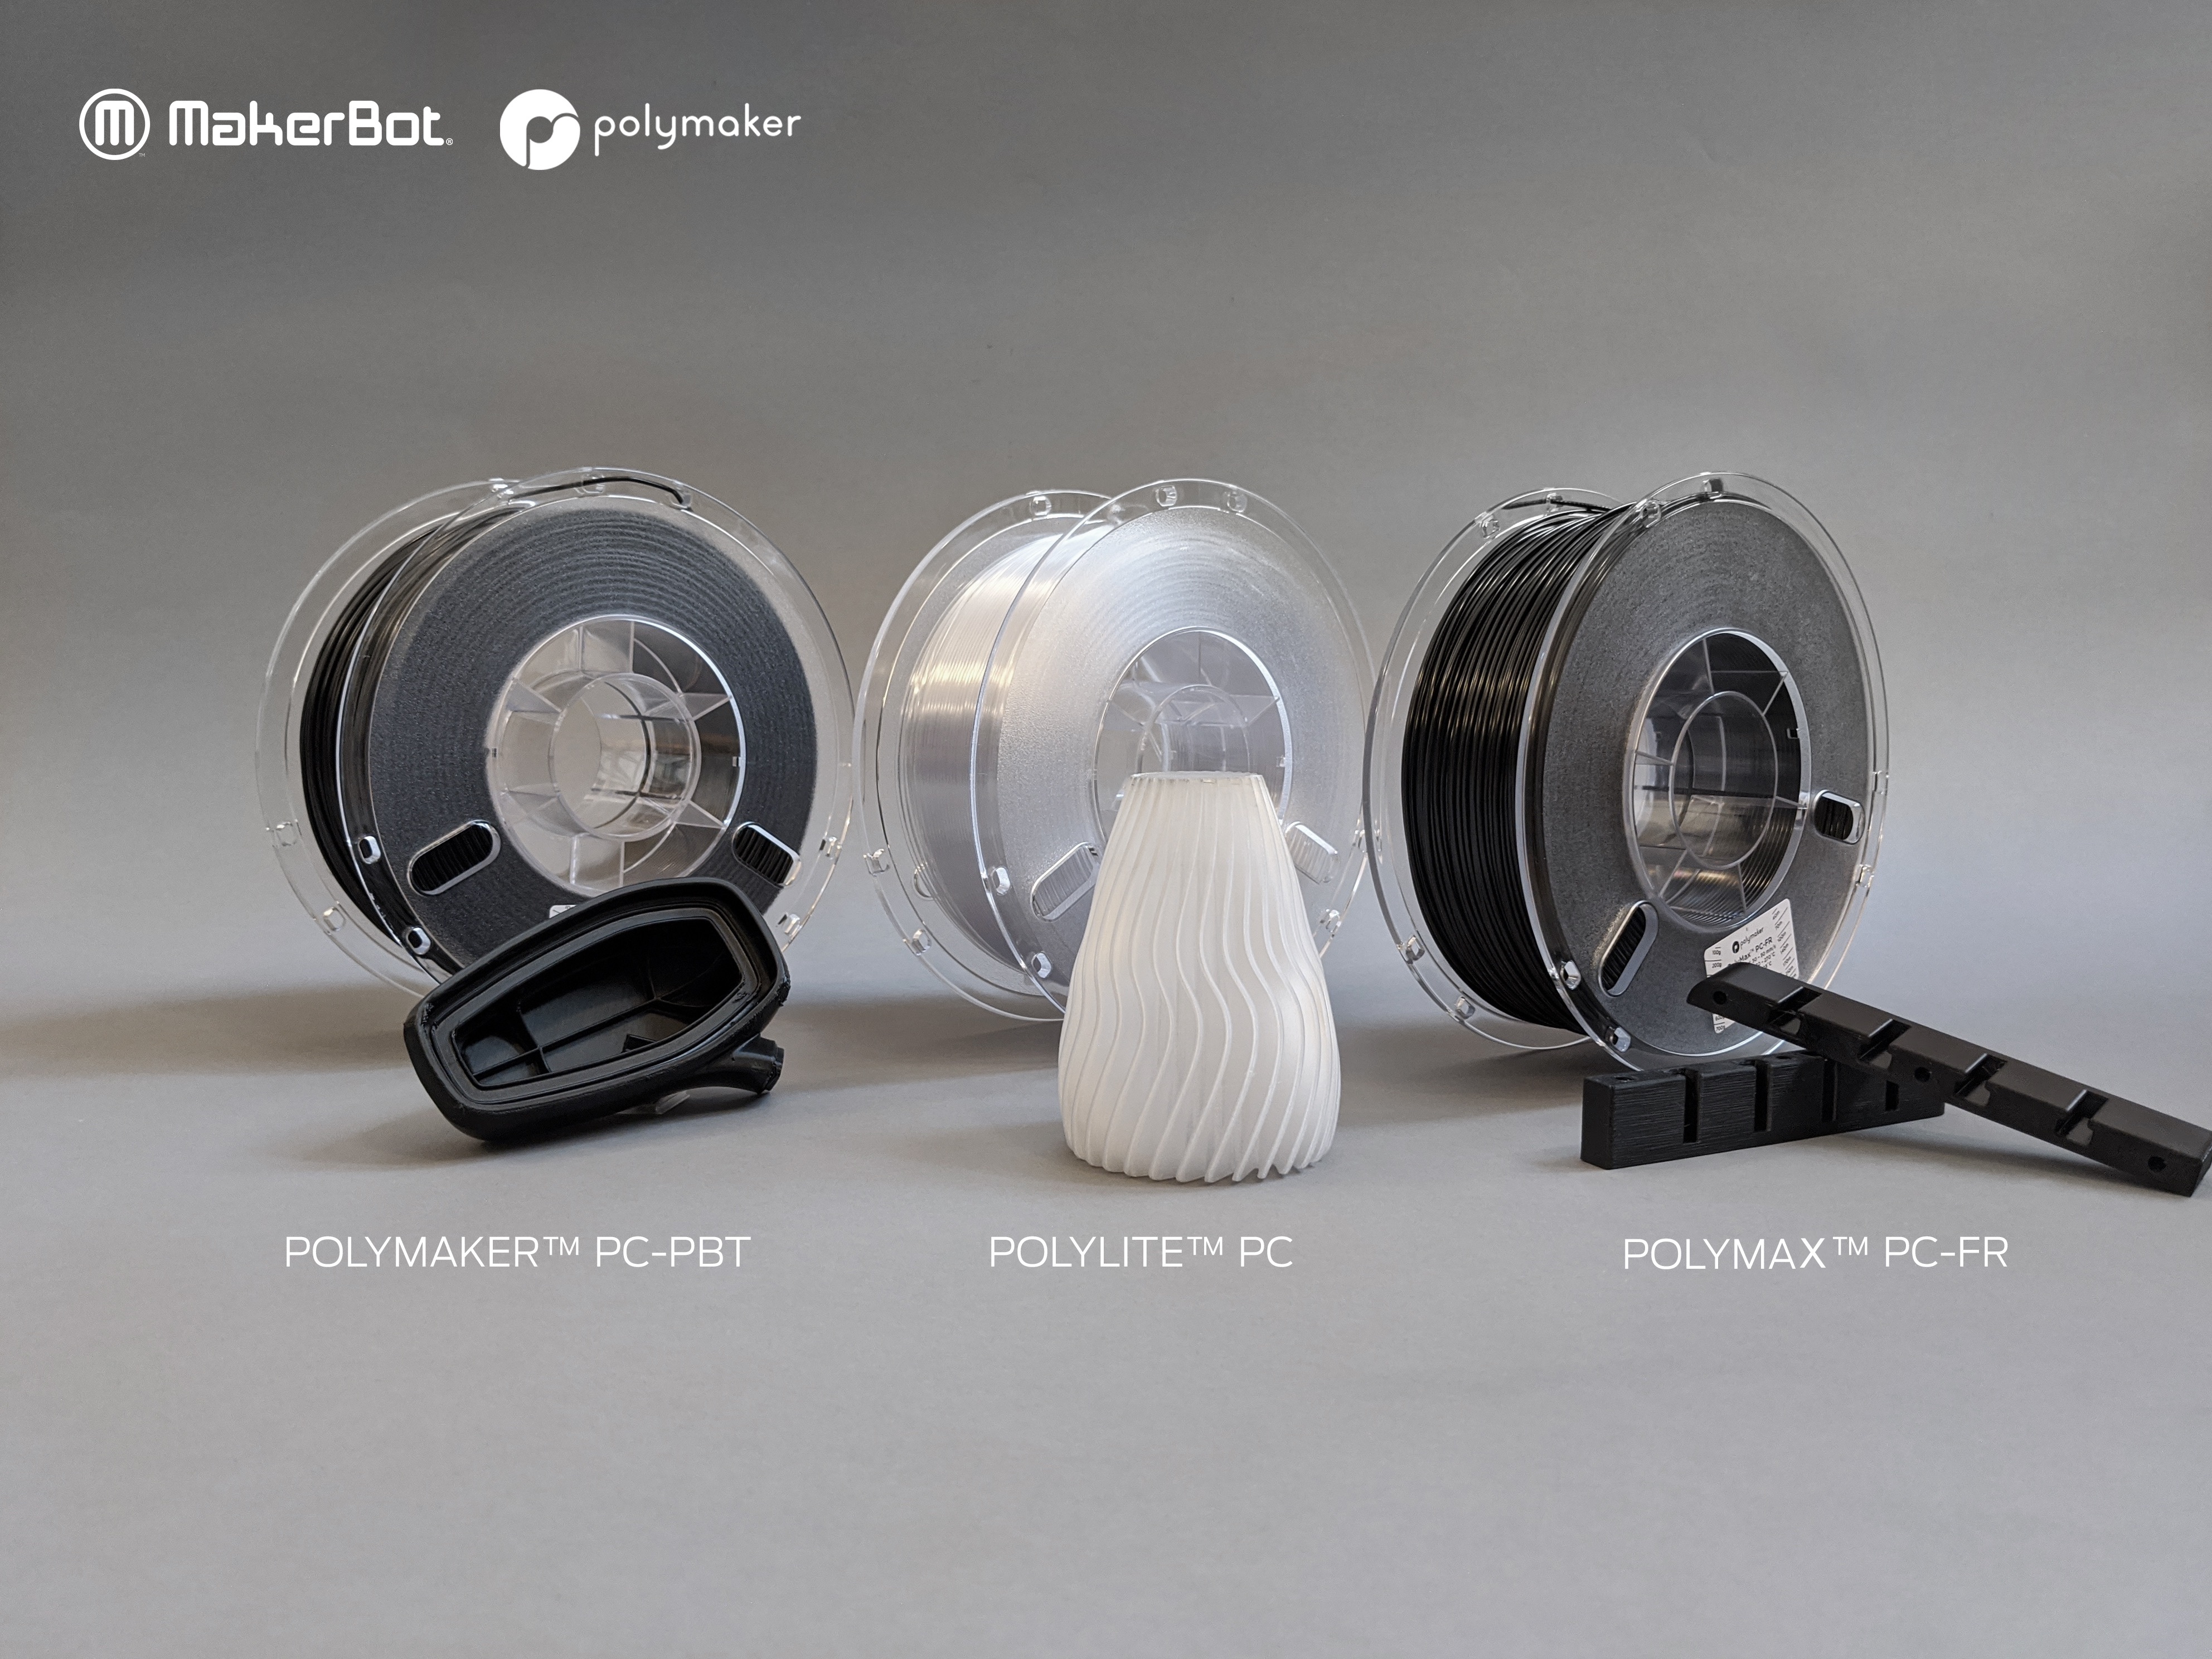 Polymaker Qualifies New Industrial Polycarbonate Materials for MakerBot LABS Experimental | Business Wire